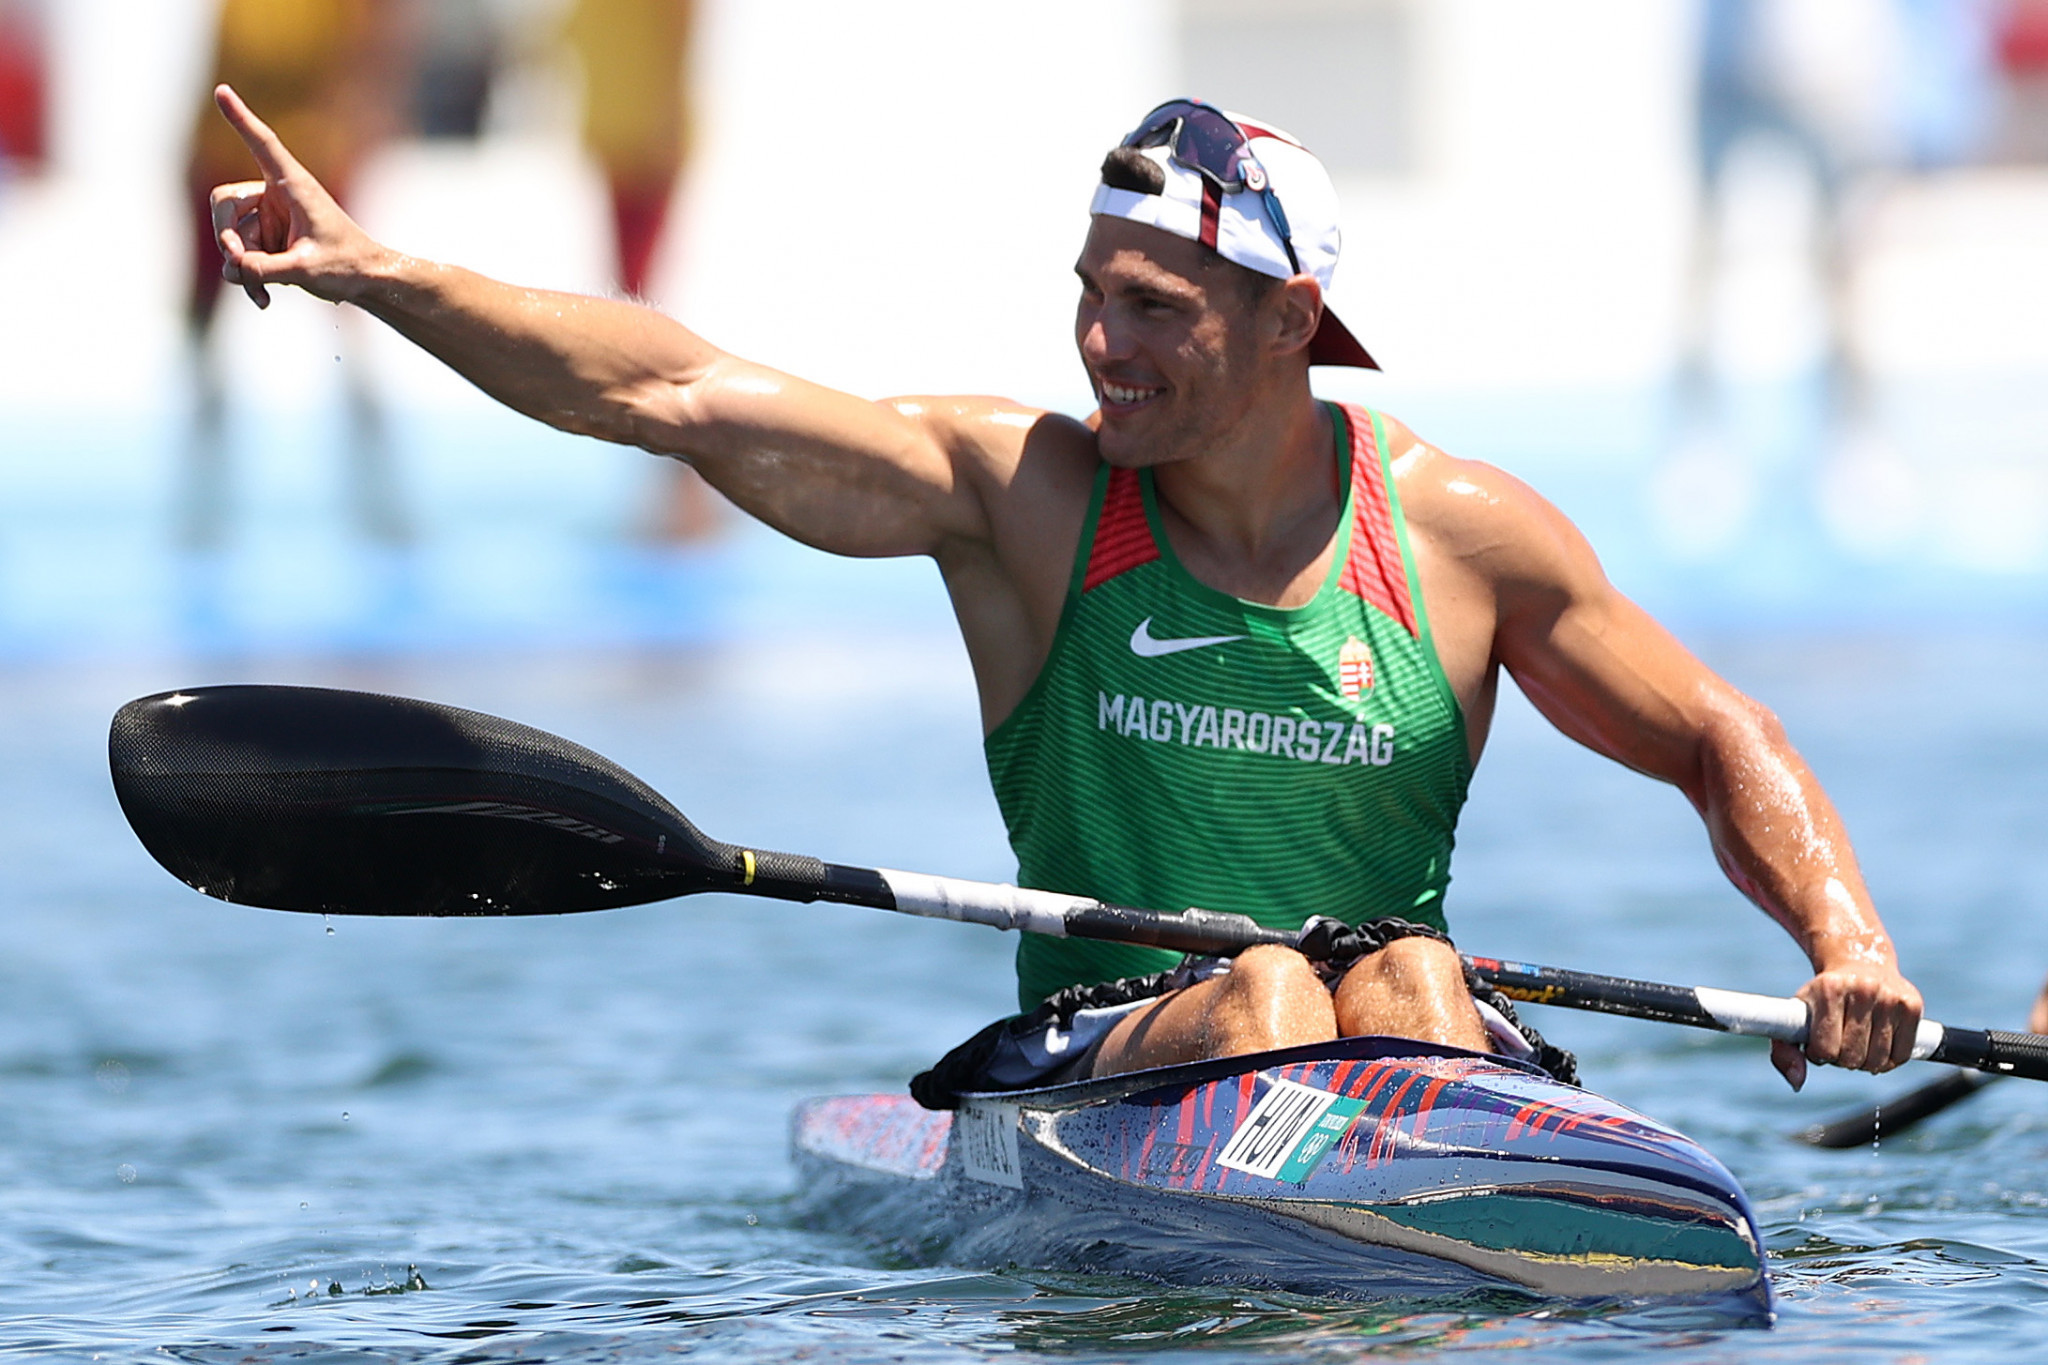 Hungary’s Tokyo 2020 canoe sprint champion Sandor Totka will be one of the elite athletes at the ICF Virtual World Cup ©Getty Images